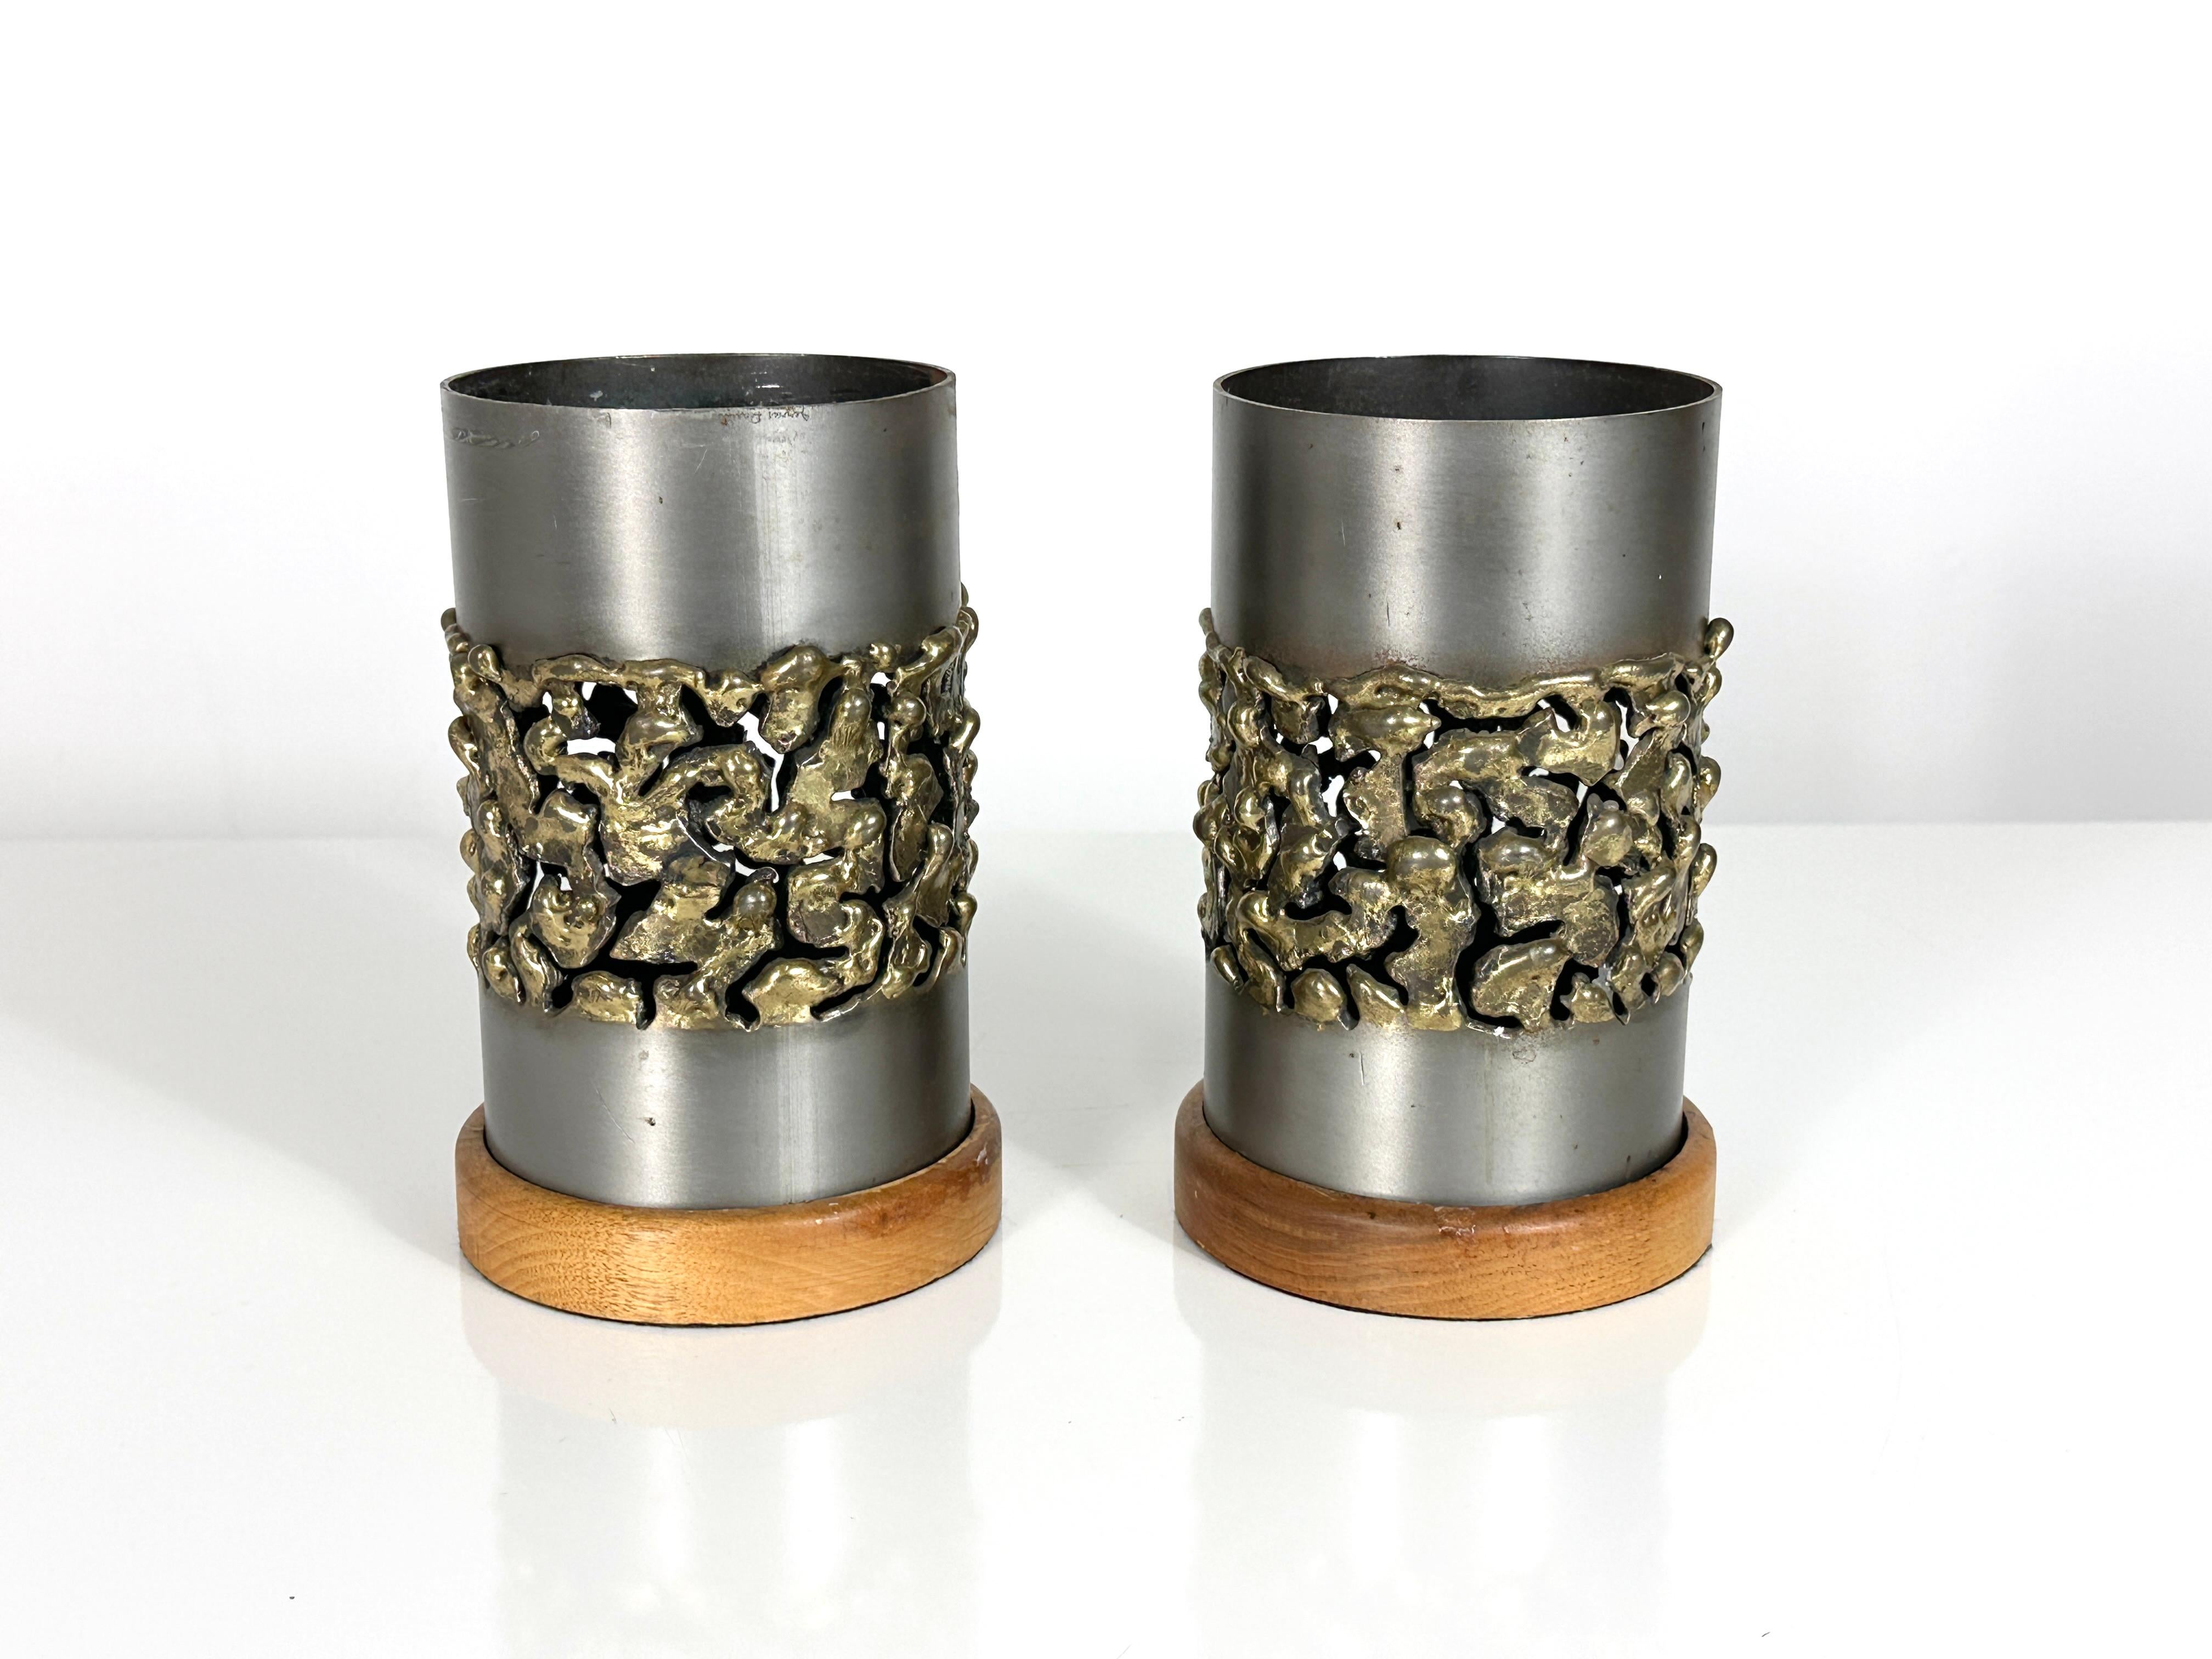 A pair of sculptural mixed metal hurricane candle holders signed Jerry Davis circa 1970s

Cylindrical design in steel with torch cut brutalist applied brass detail
Inset into wood bases

Etched signature to upper rim

4